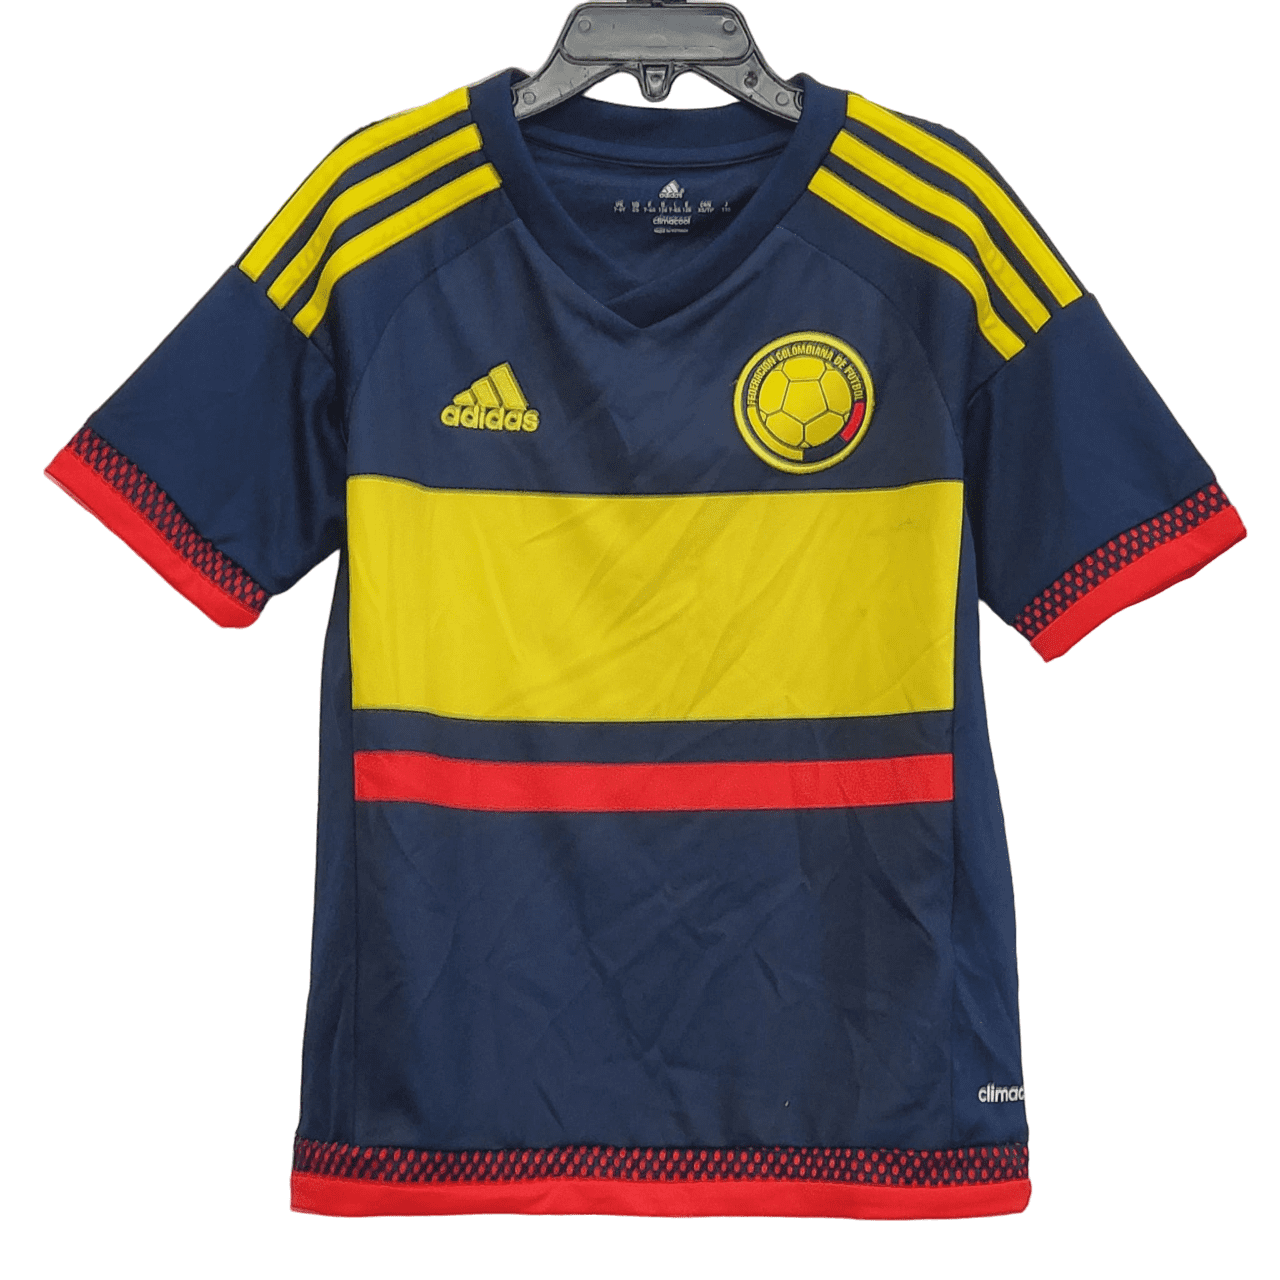 Adidas Climacool Youth Colombia International Soccer Jersey, Blue, - Walmart.com